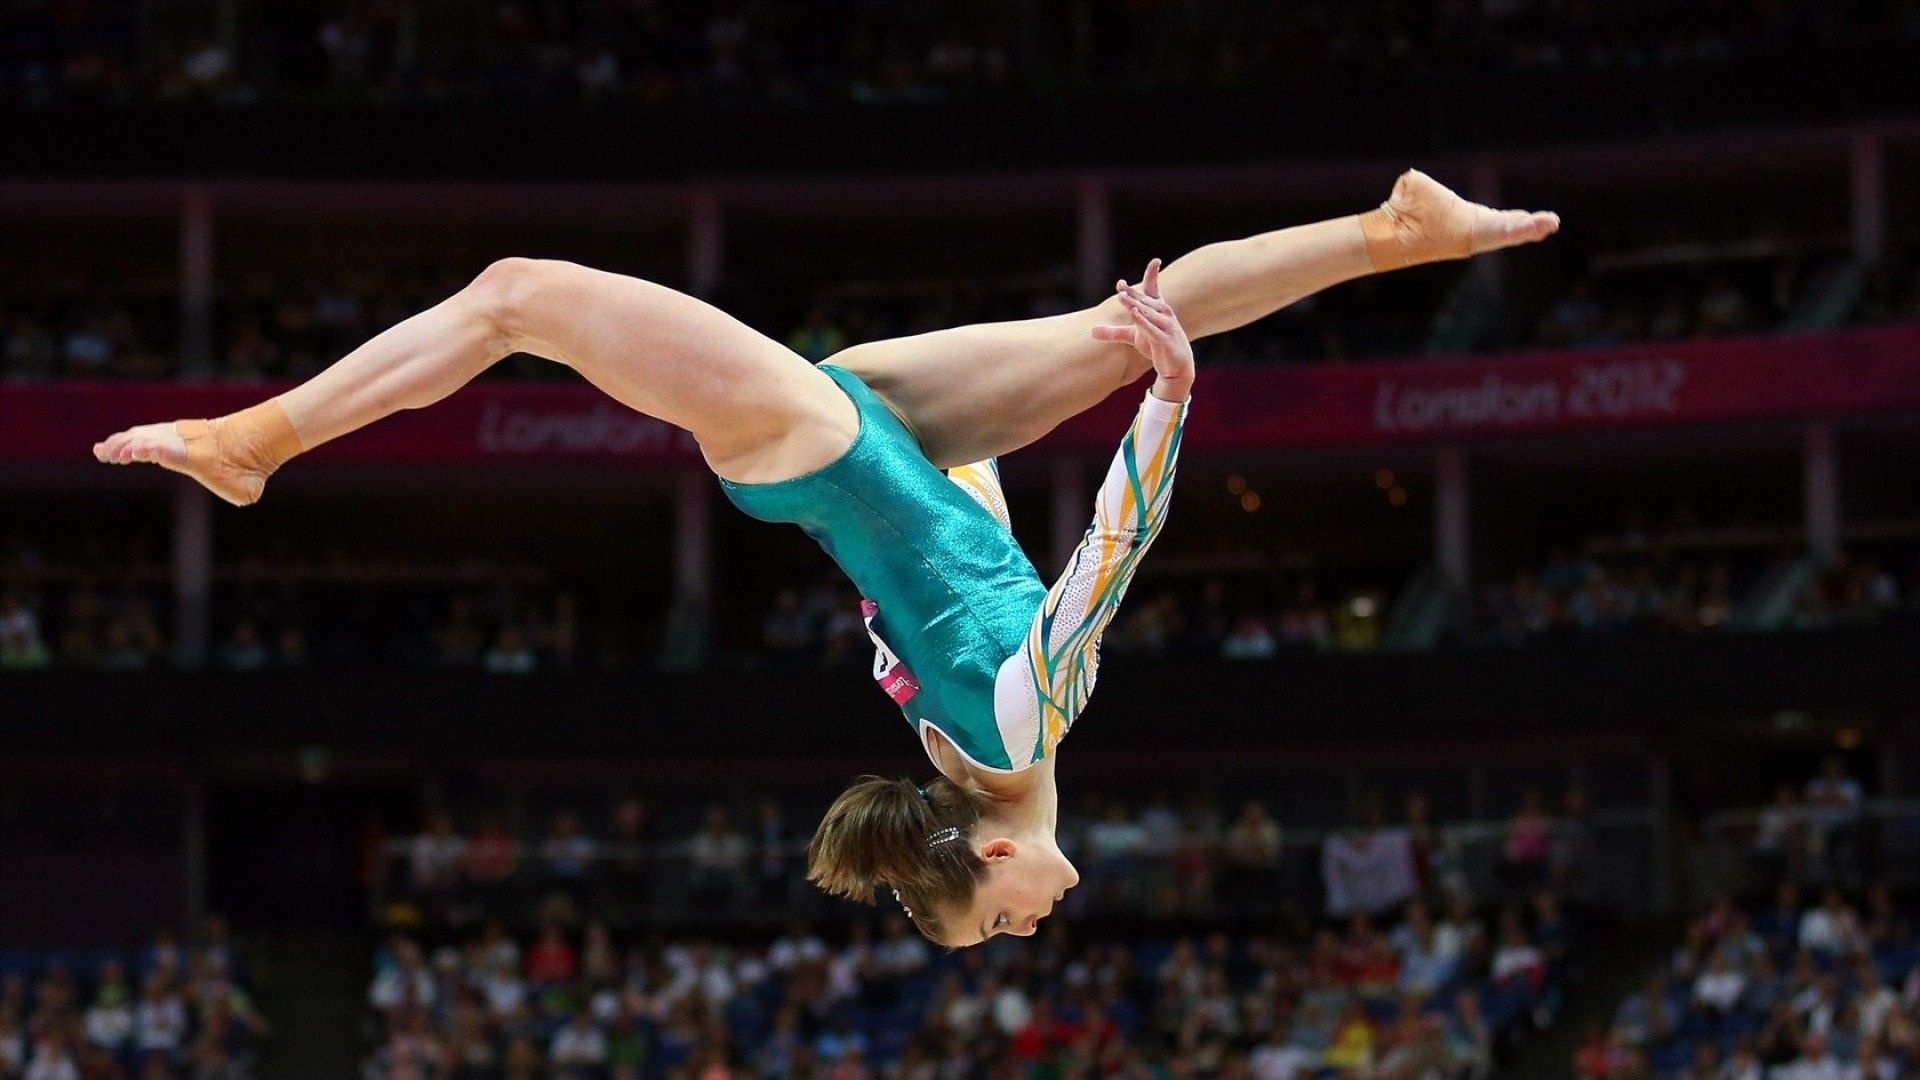 Acrobatic Gymnastics: A back-flip jump performed by a professional gymnast at the 2012 Summer Olympics. 1920x1080 Full HD Wallpaper.